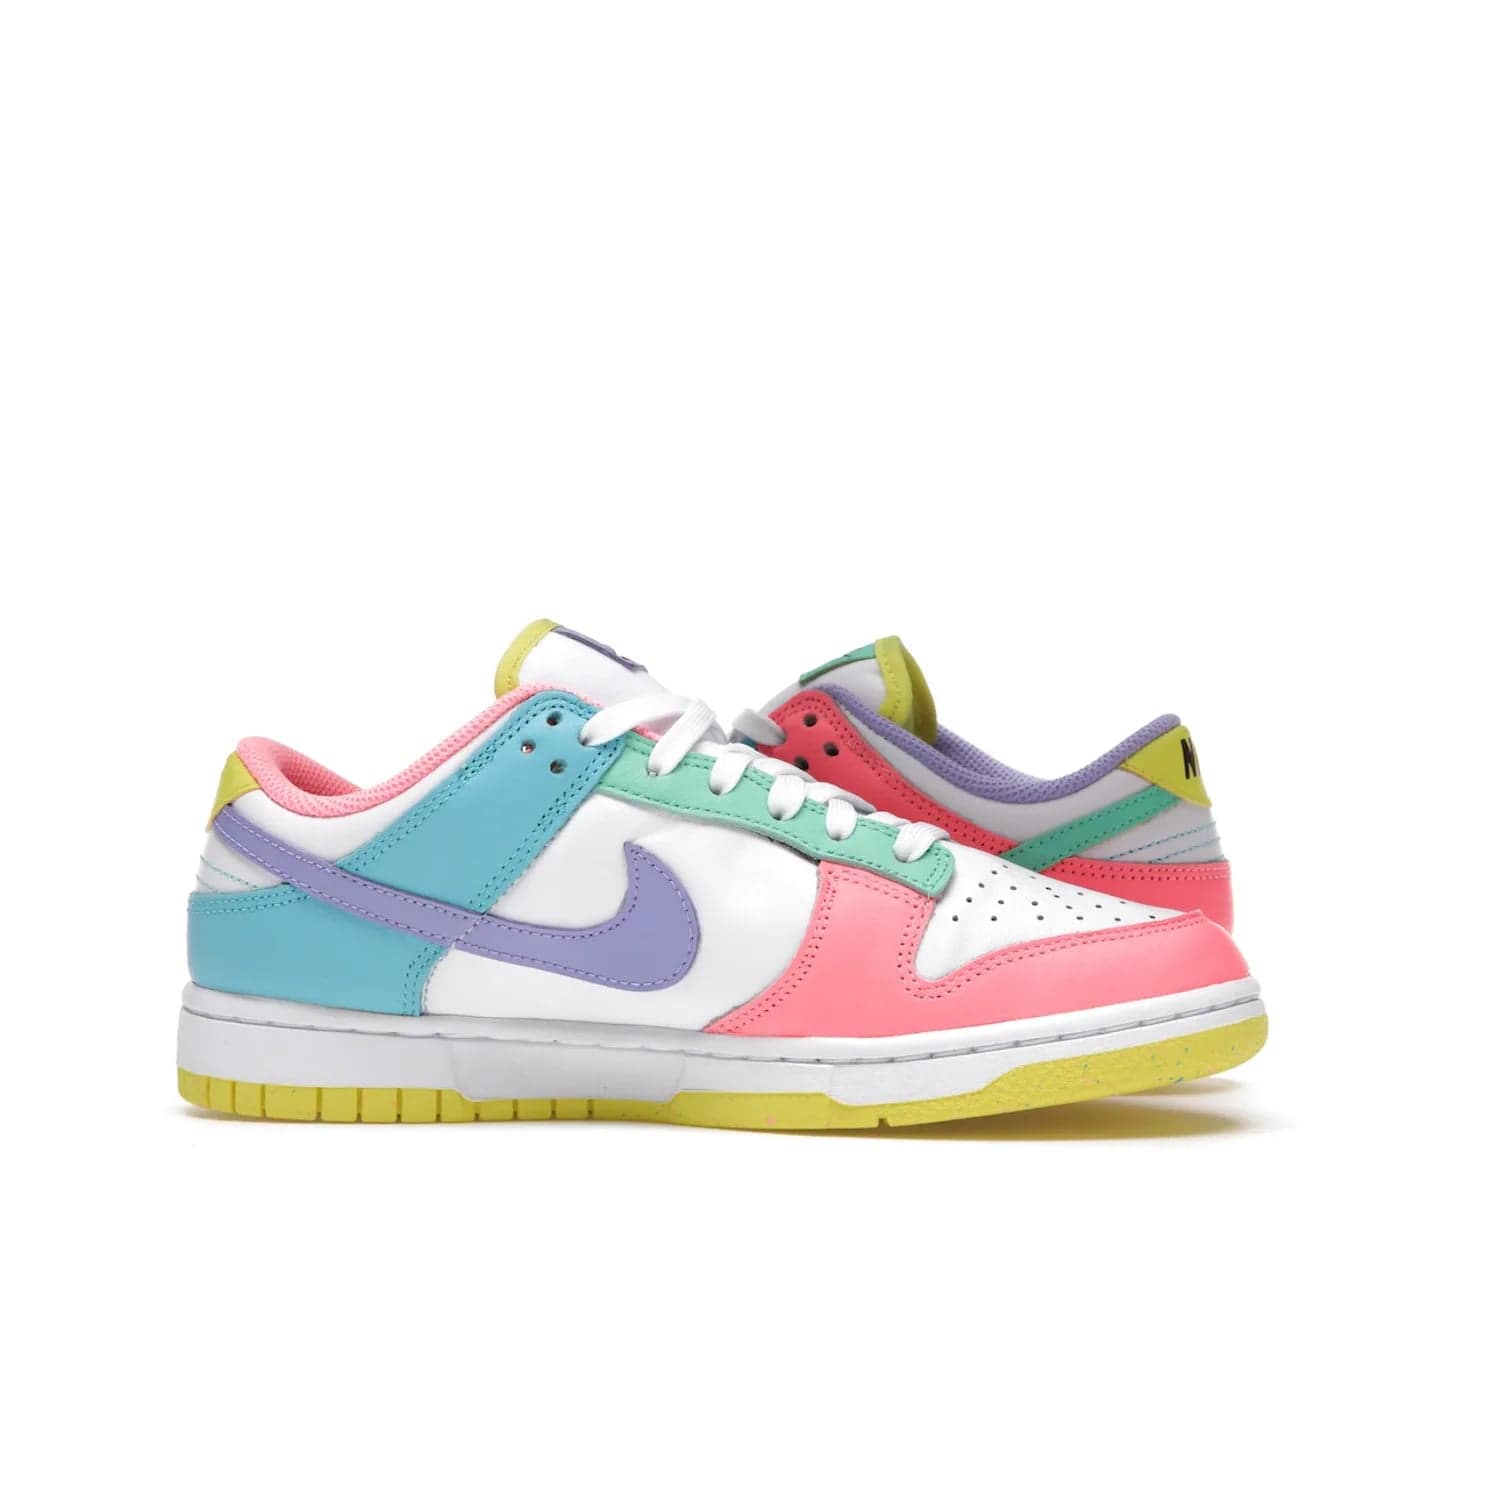 Nike Dunk Low SE Easter Candy (Women's) - Image 20 - Only at www.BallersClubKickz.com - UP
The Nike Dunk Low SE Easter Candy (Women's) brings a stylish touch to any outfit with its white leather upper, colorful accents, and multicolor speckle detailing. Shop now before they're gone.